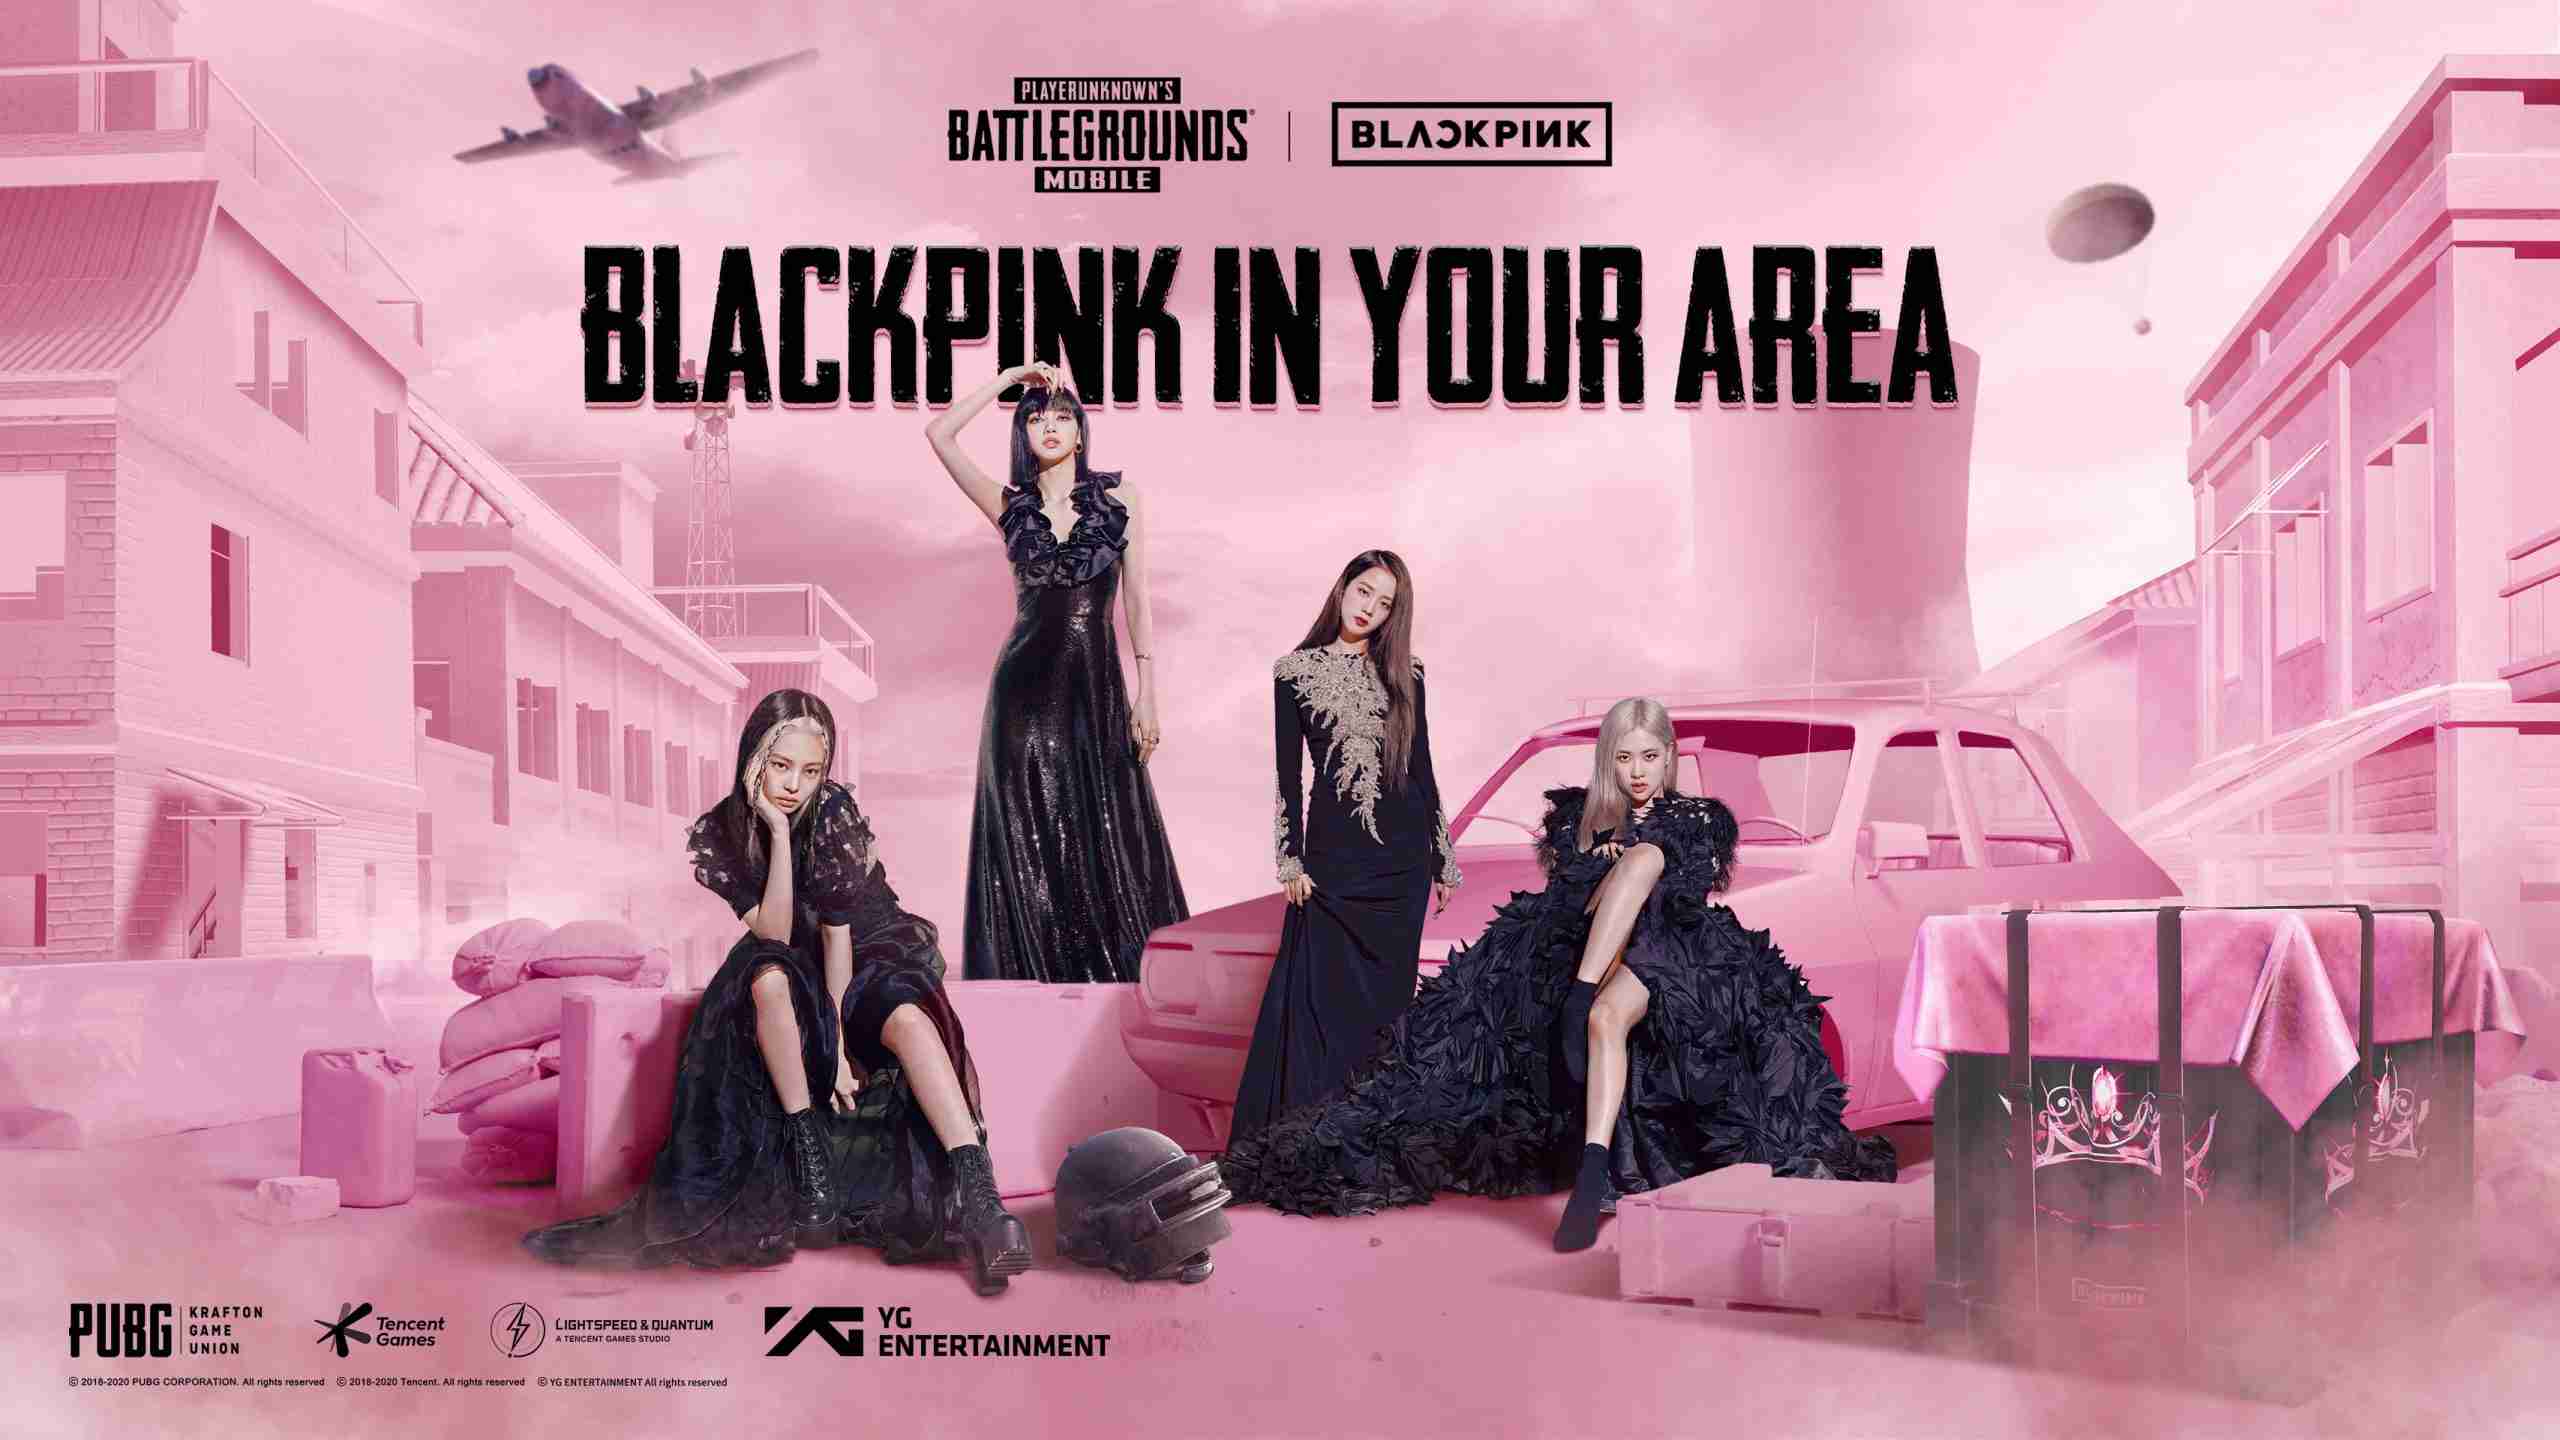 Blackpink is coming to PUBG